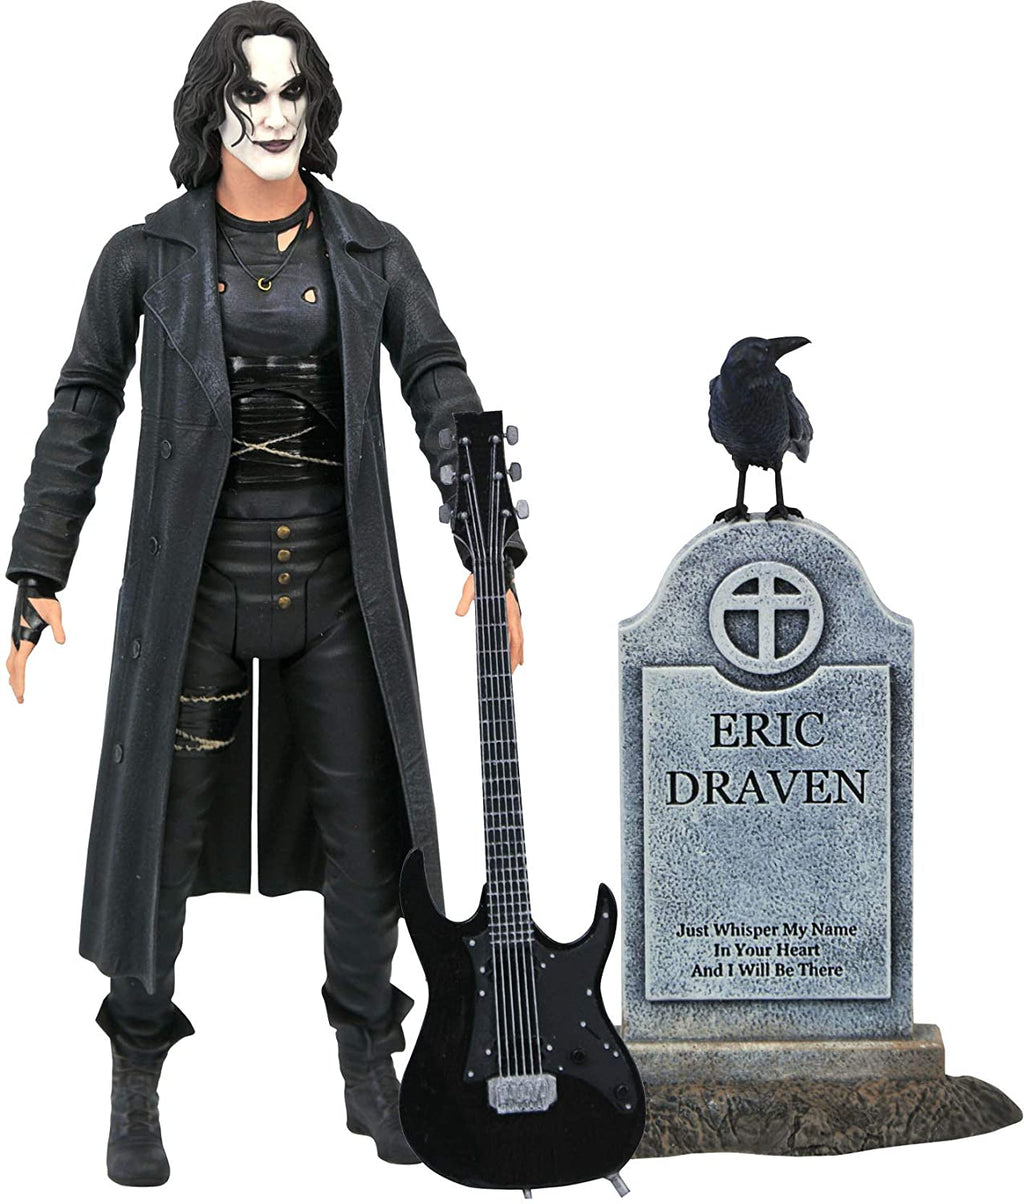 The Crow - Eric Draven The Crow Deluxe Action Figure by Diamond 